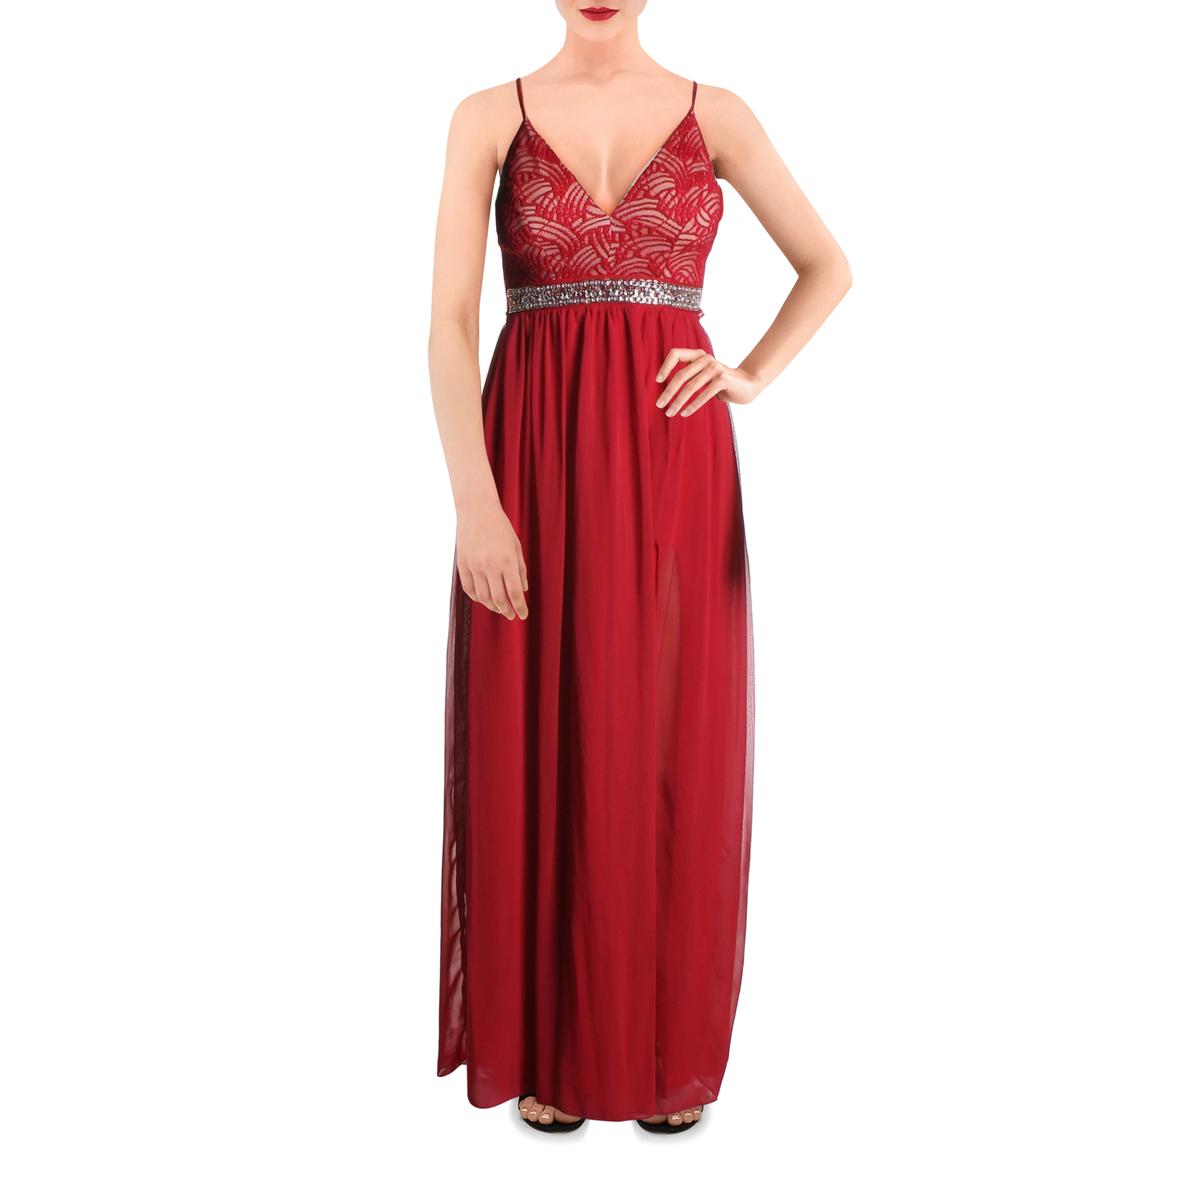 Honey And Rosie Womens Red Embellished Evening Dress Gown XS BHFO 4093 ...